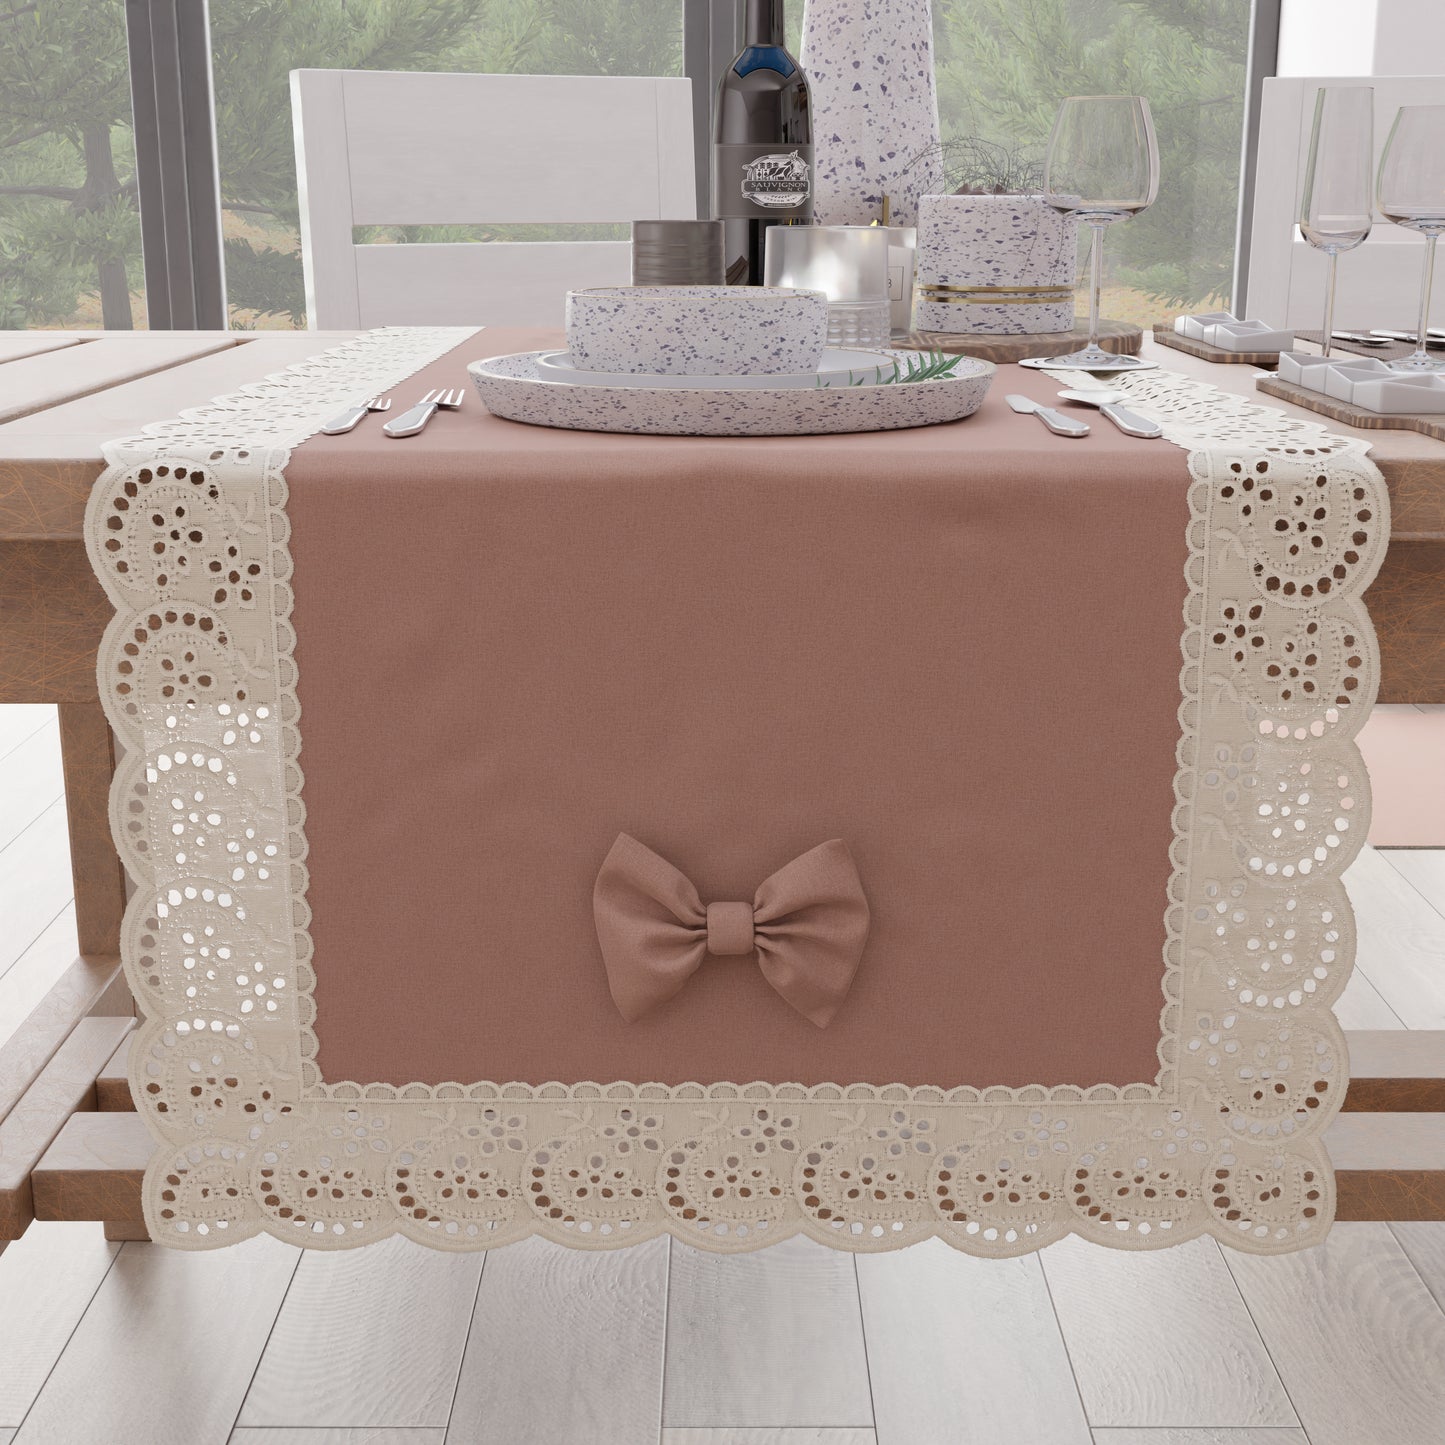 Elegant Shabby Chic Table Runner with Lace and Powder Pink Bows 